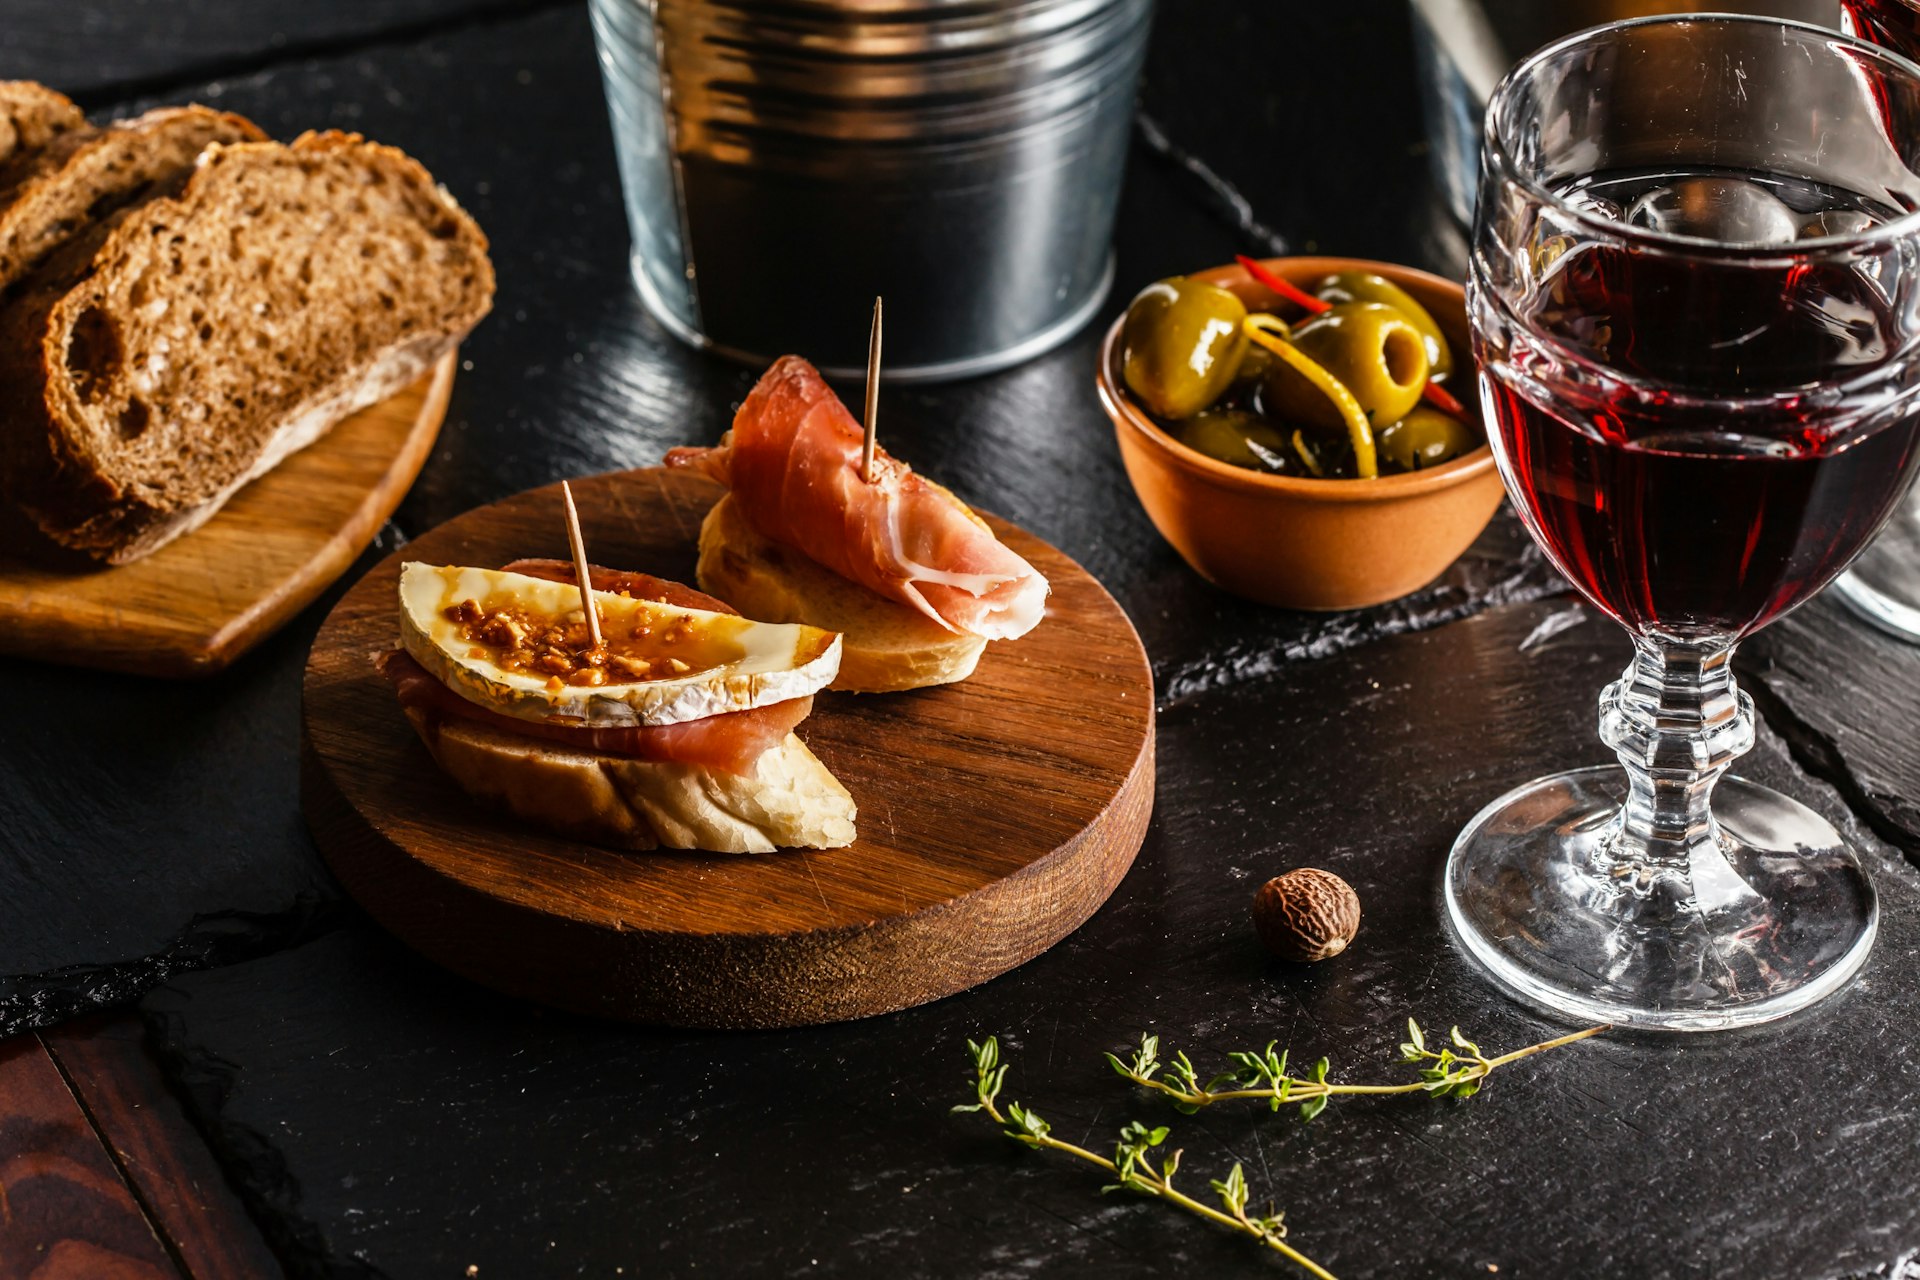 Closeup on a table with a plate of tapas (two slices of bread, one topped with ham and cheese and the other with just ham, held together with toothpicks), slices of plain bread, a dish of olives, sprigs of thyme and a glass of wine